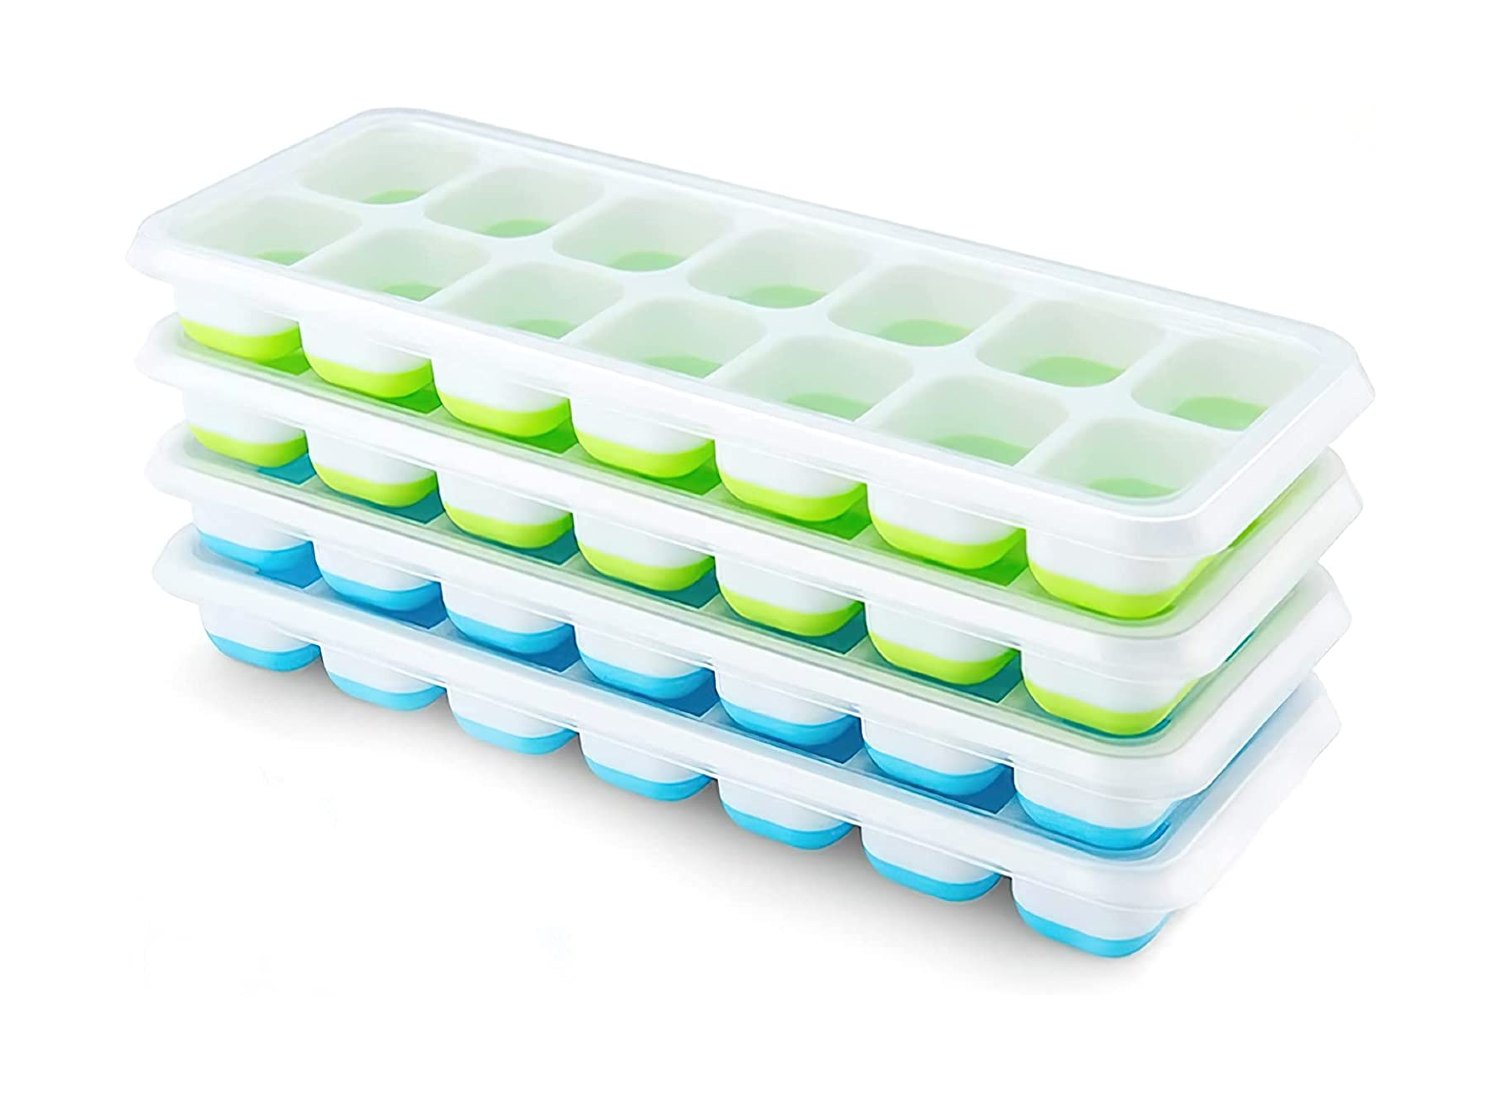 https://www.brit.co/reviews/wp-content/uploads/2023/05/airabc-ice-cube-trays-britco.jpg